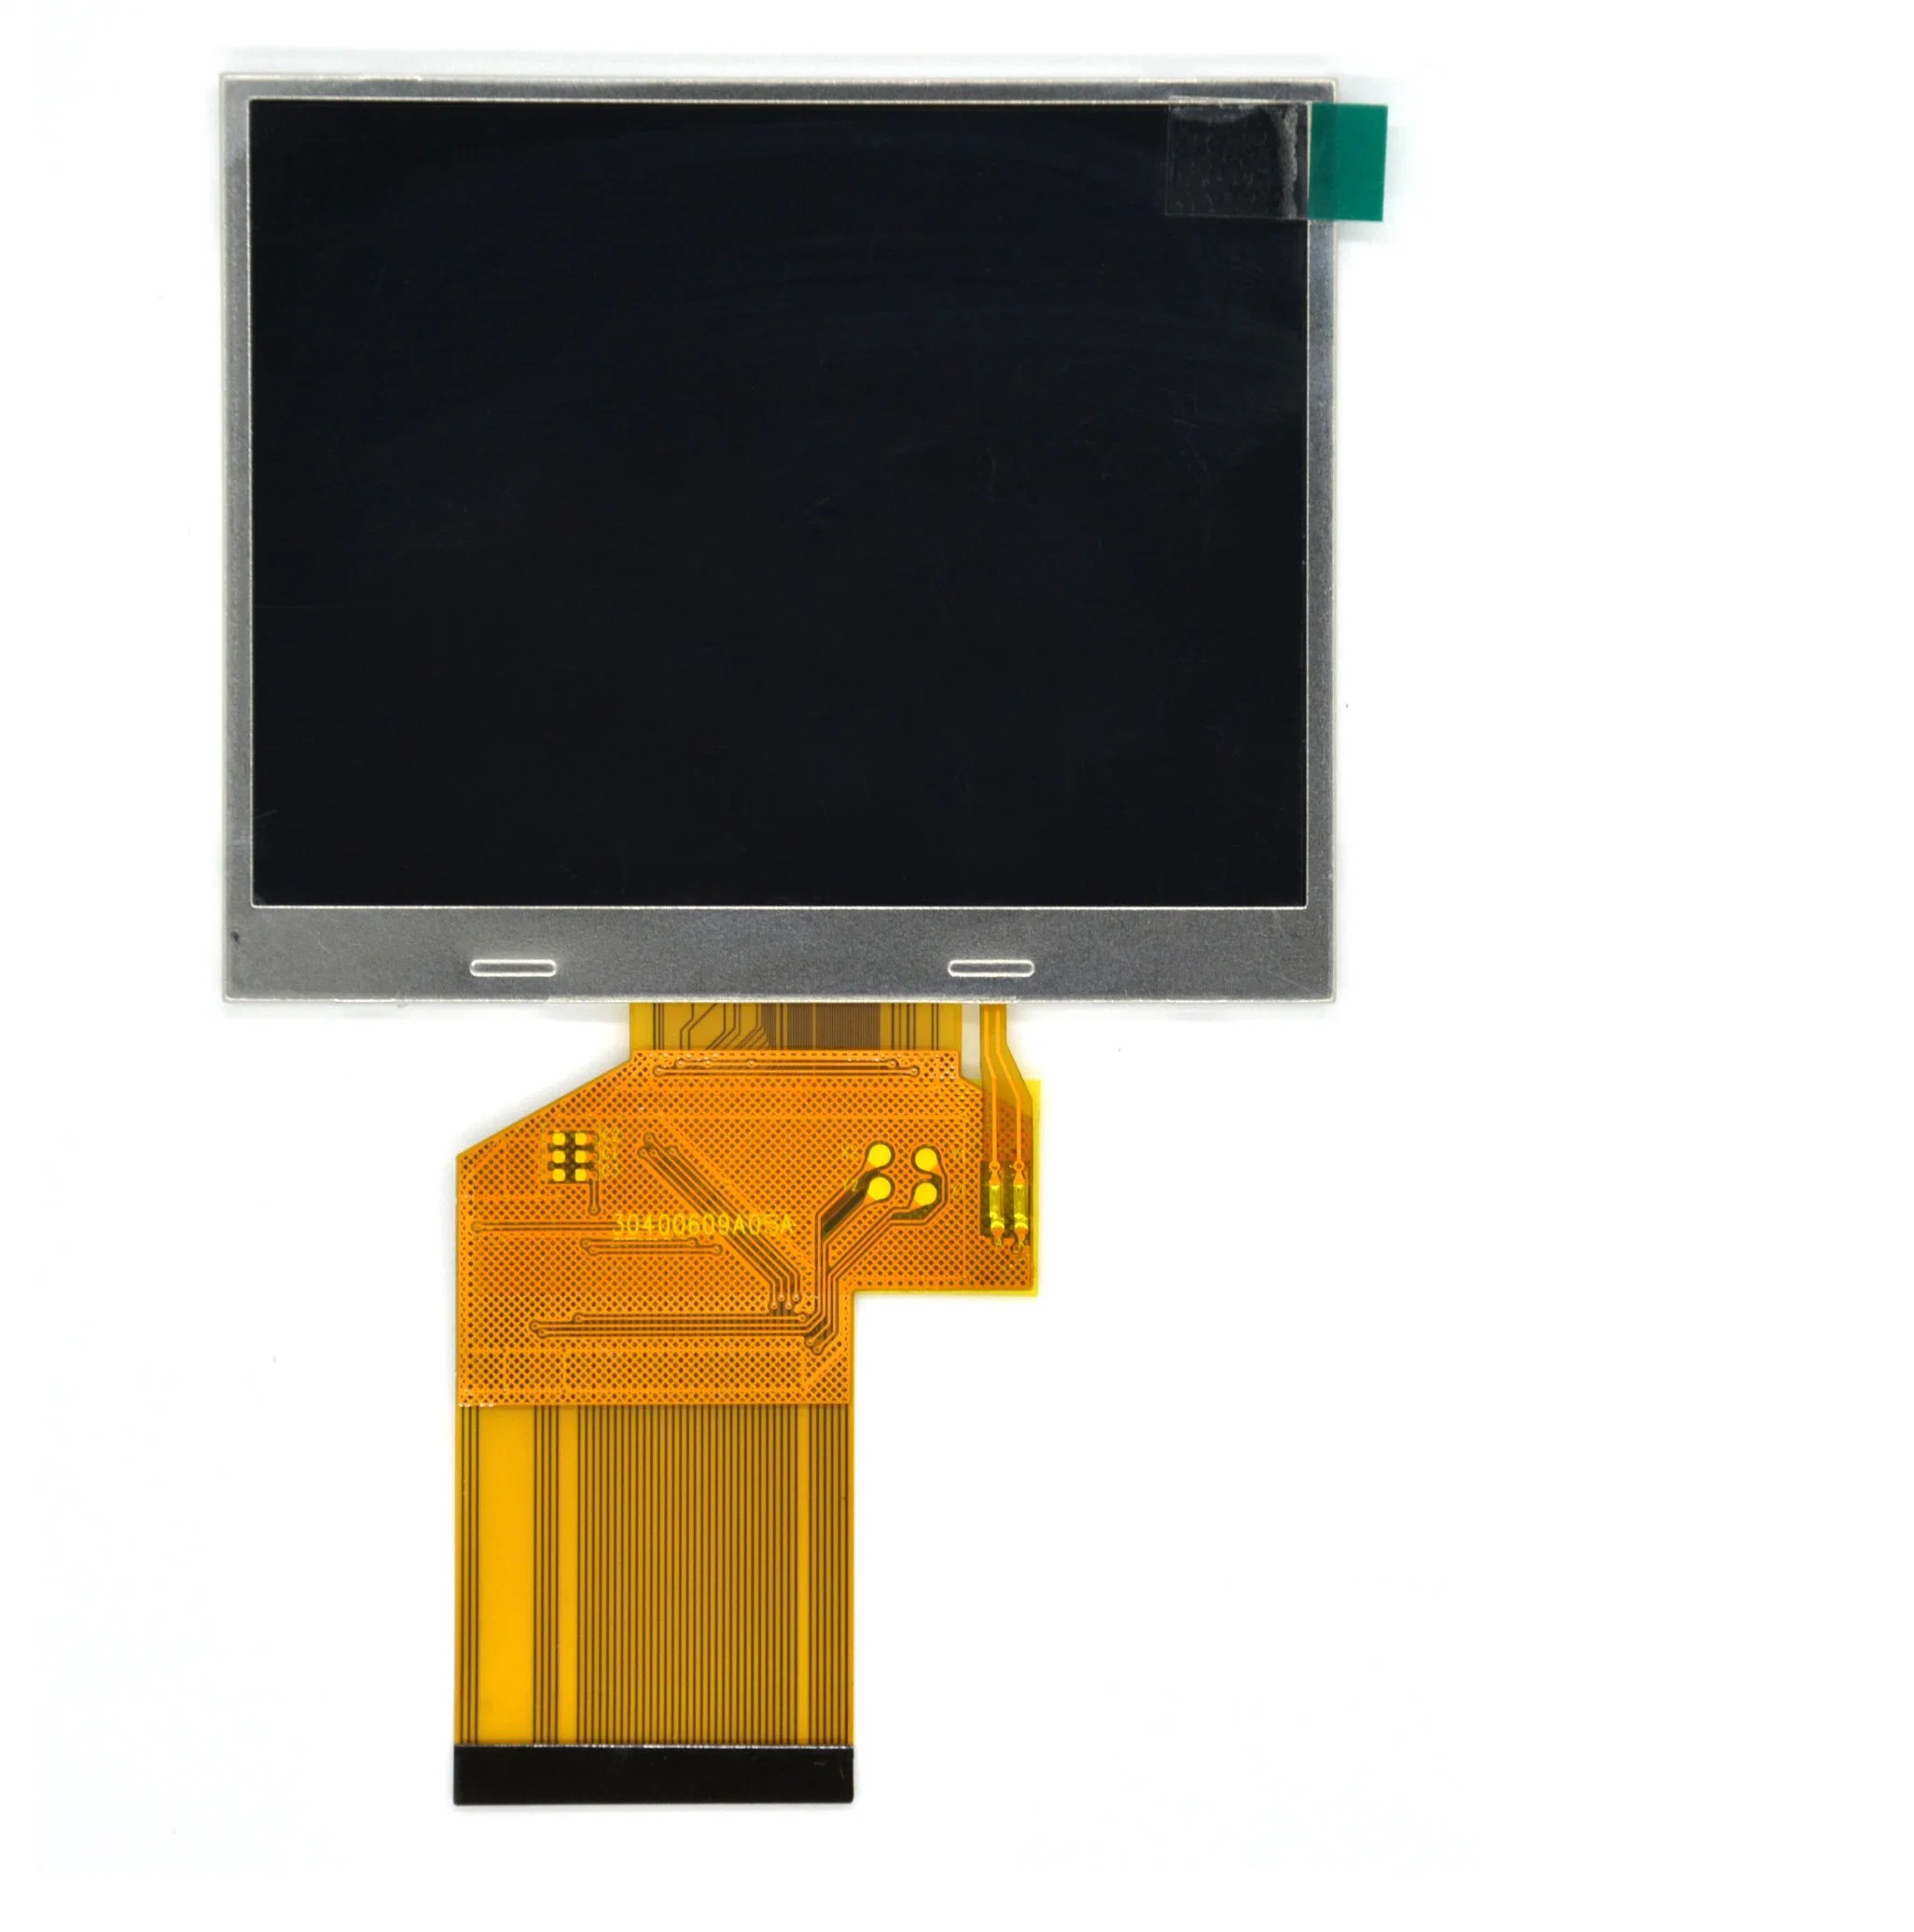 3.5 Inch Customized TFT LCD Display 12 O'clock View